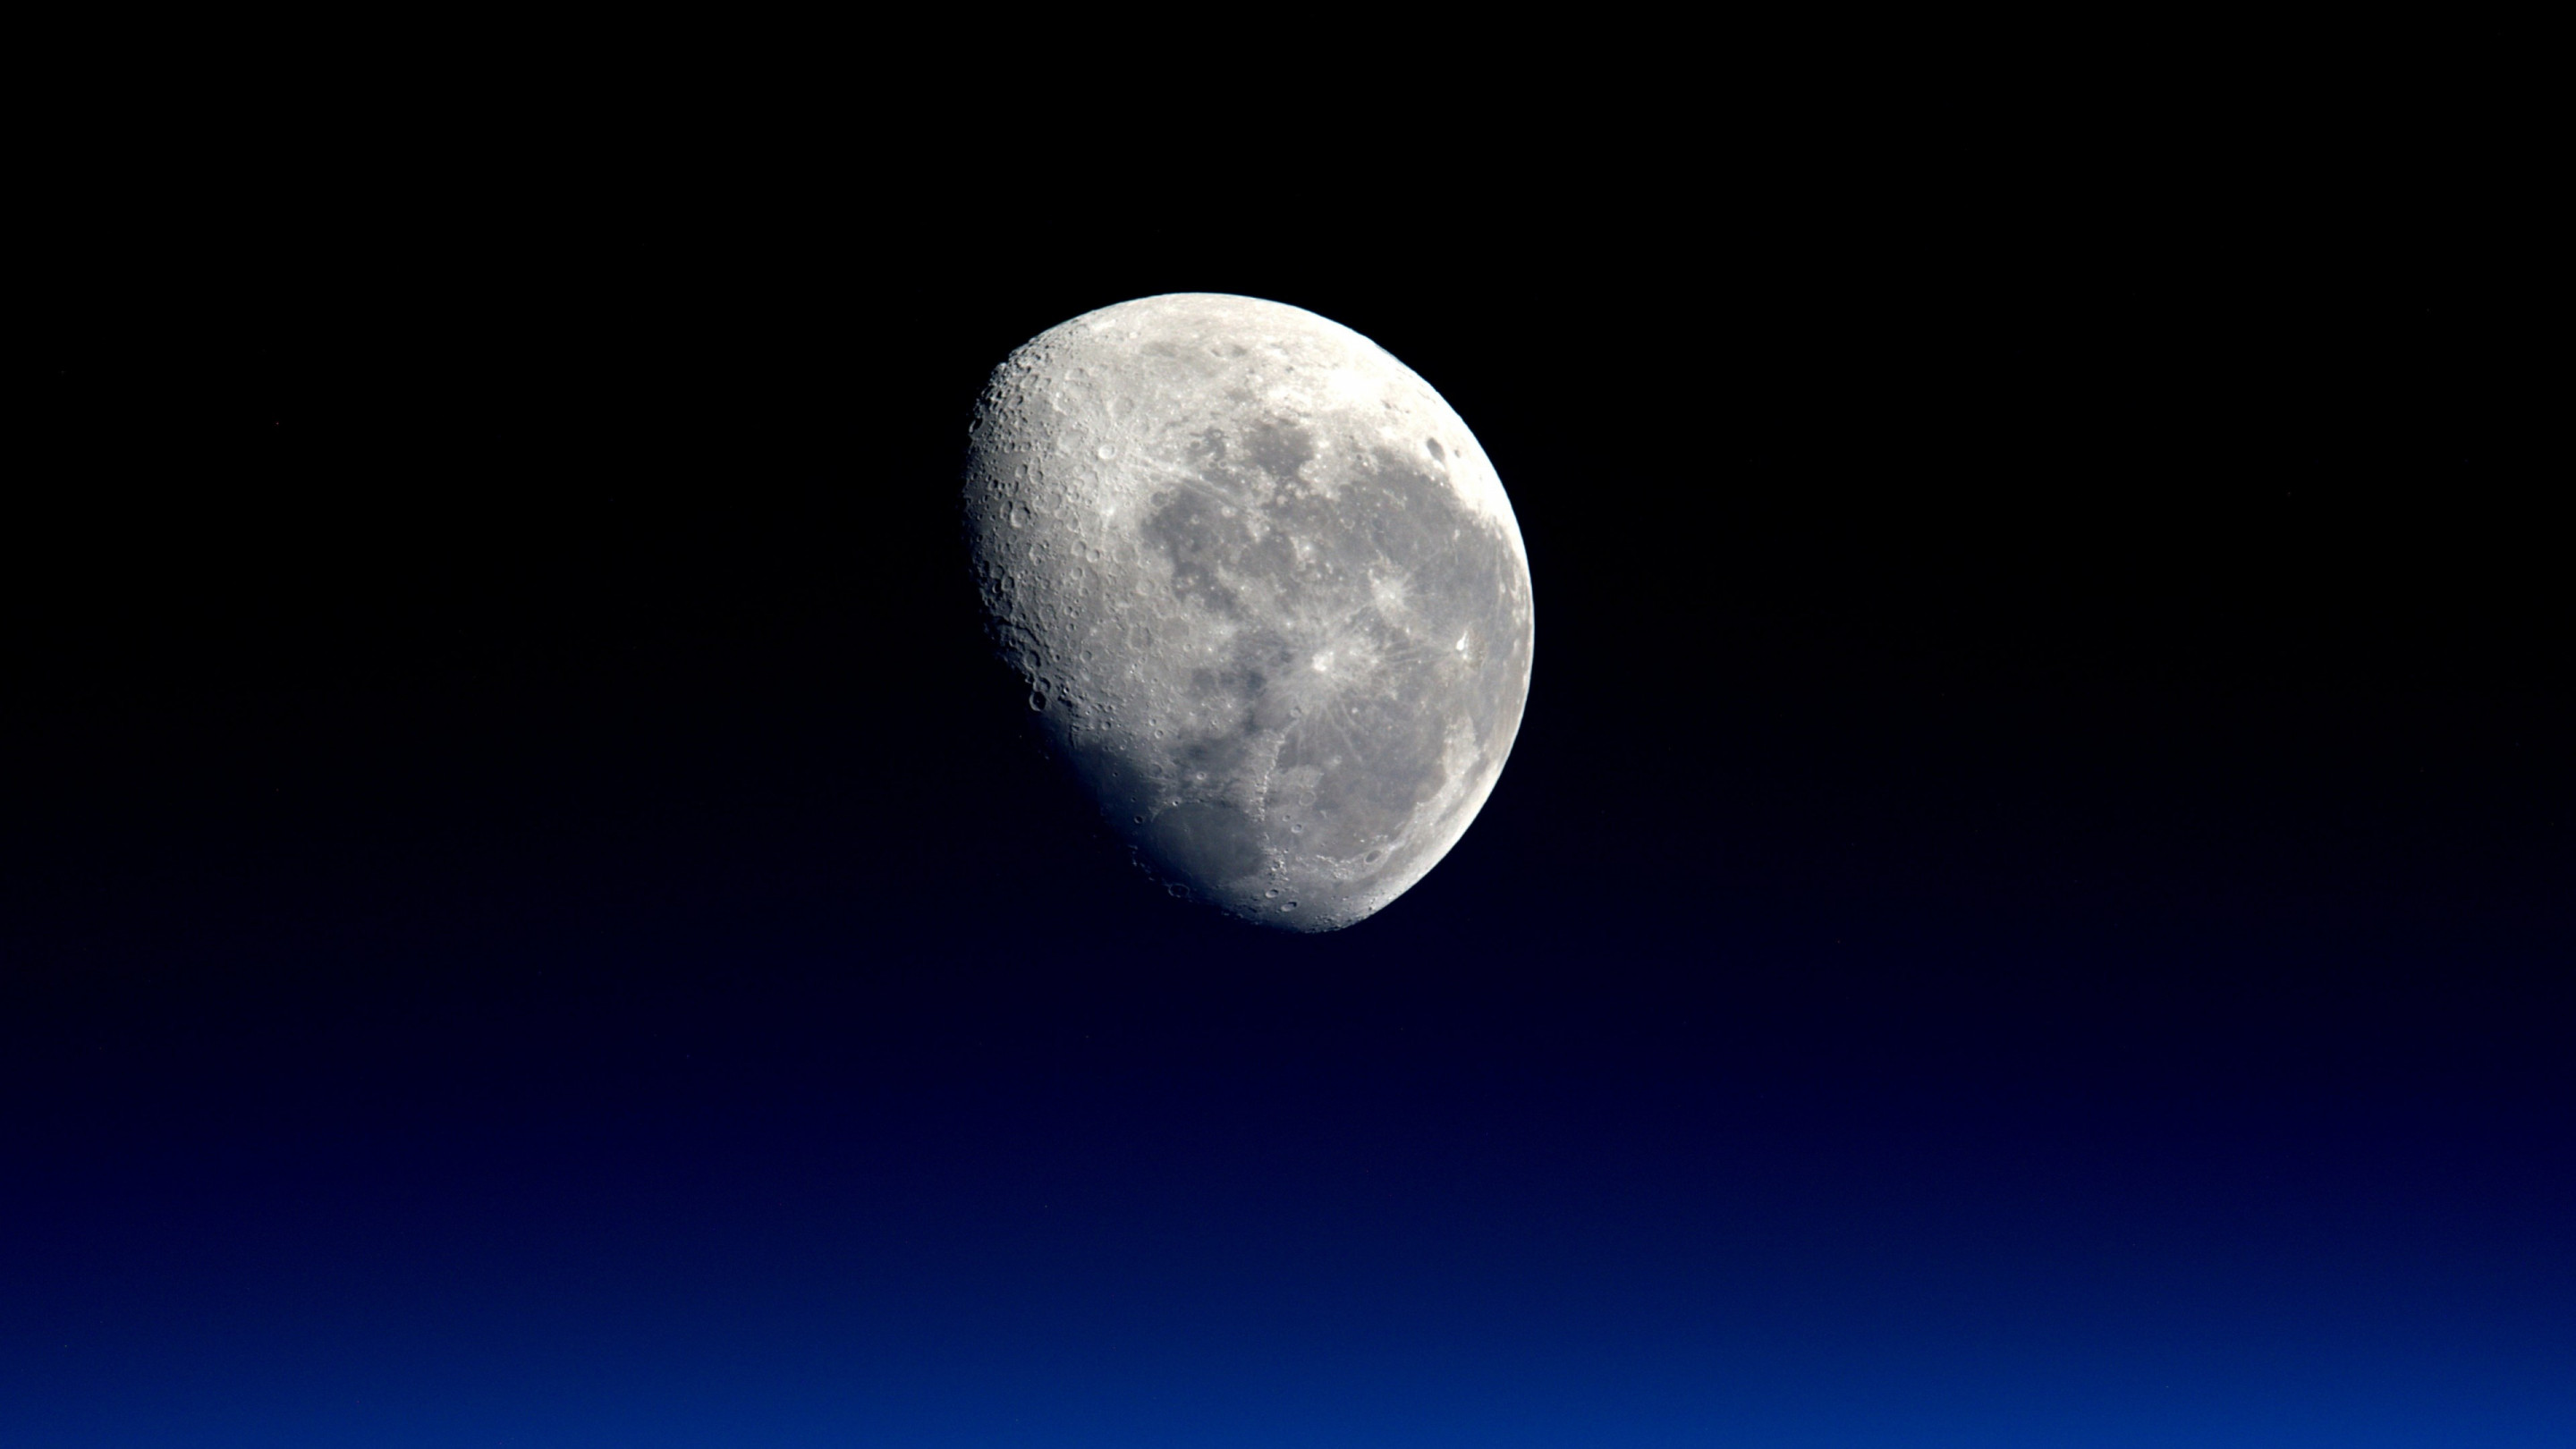 Our natural satellite: The Moon wallpaper 2880x1620